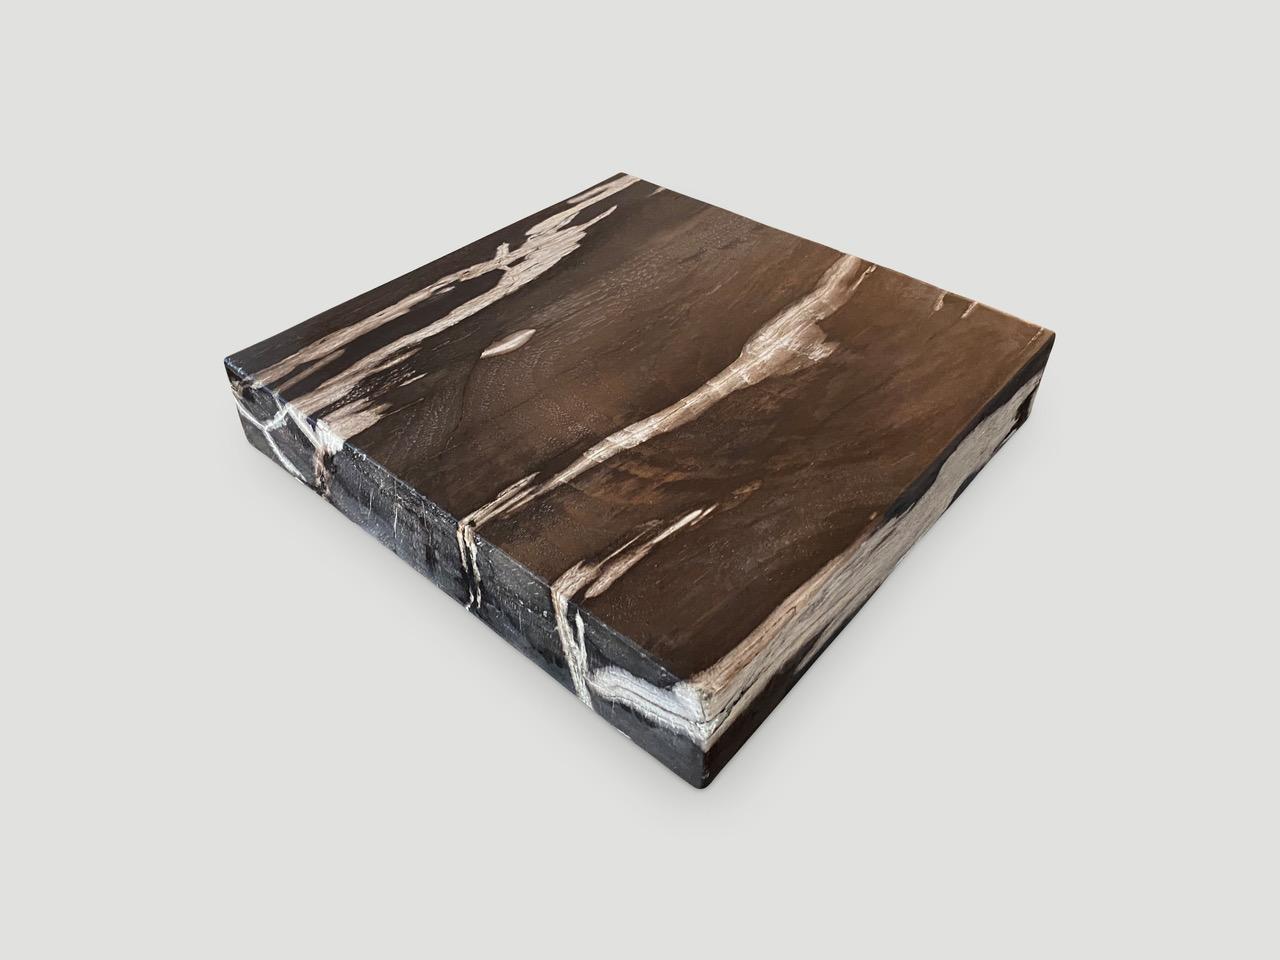 Beautiful petrified wood black and white toned slab. This can also be used to elevate a wooden side table by placing it on top.

As with a diamond, we polish the highest quality fossilized petrified wood, using our latest ground breaking